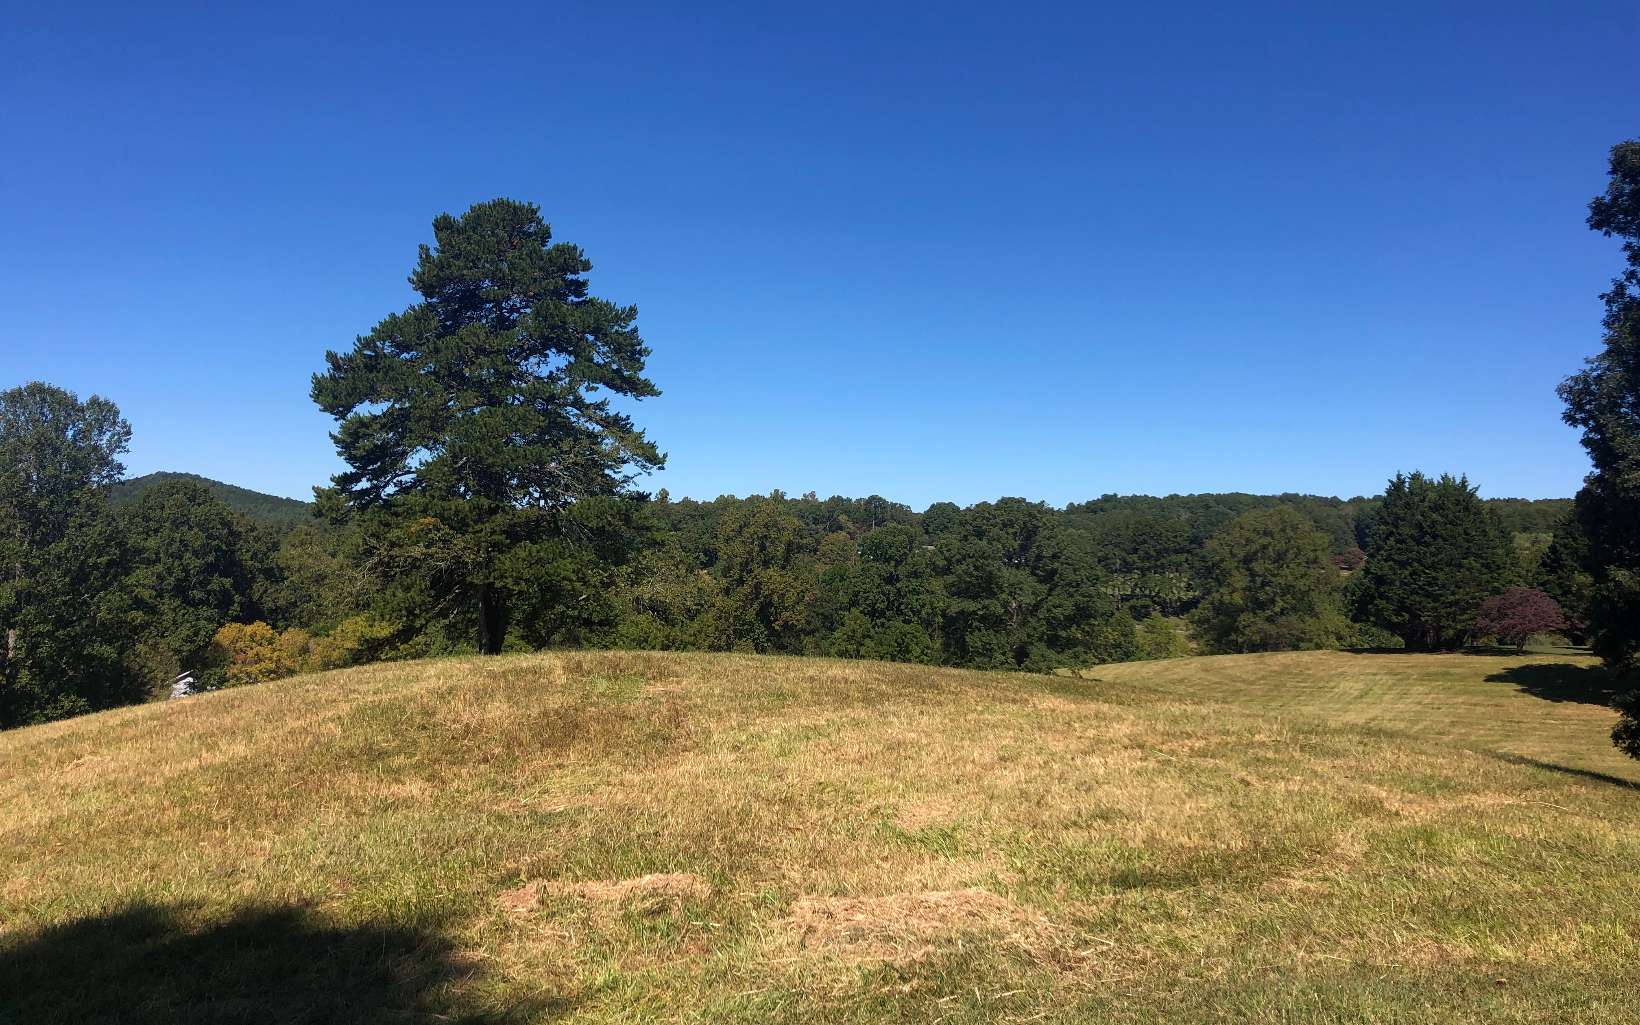 Beautiful estate size lot only about 5 miles from town and close to Lake Nottely. Nearly 5 usable rolling acres with a nice flat knoll to build on. Wide long range view of the pasture and mountains. In an area of nice homes, paved streets, and underground utilities.